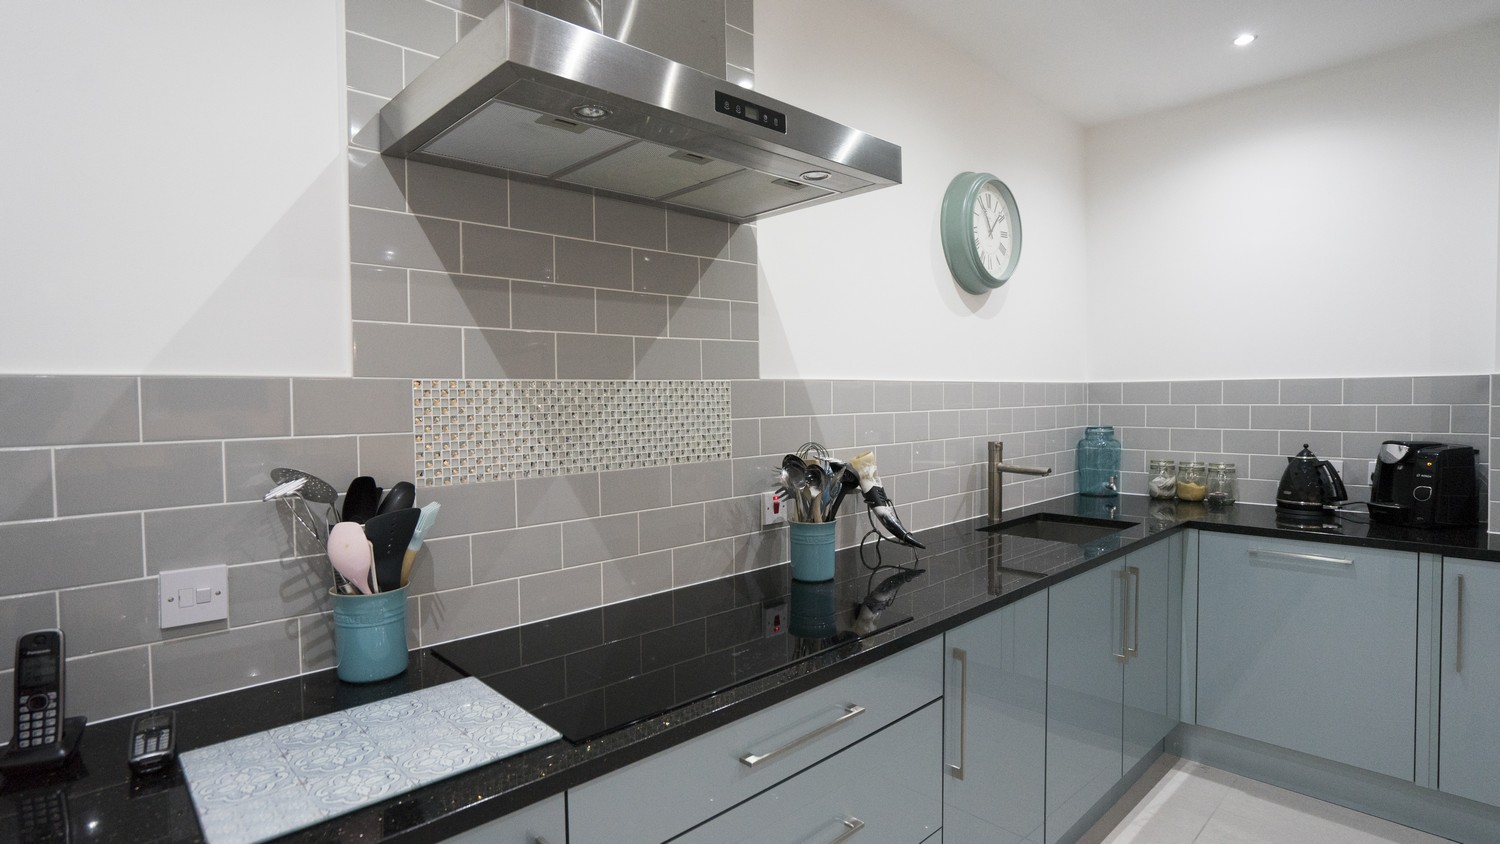 Close up of the ceramic hob and extractor fan installed in this modern kitchen.